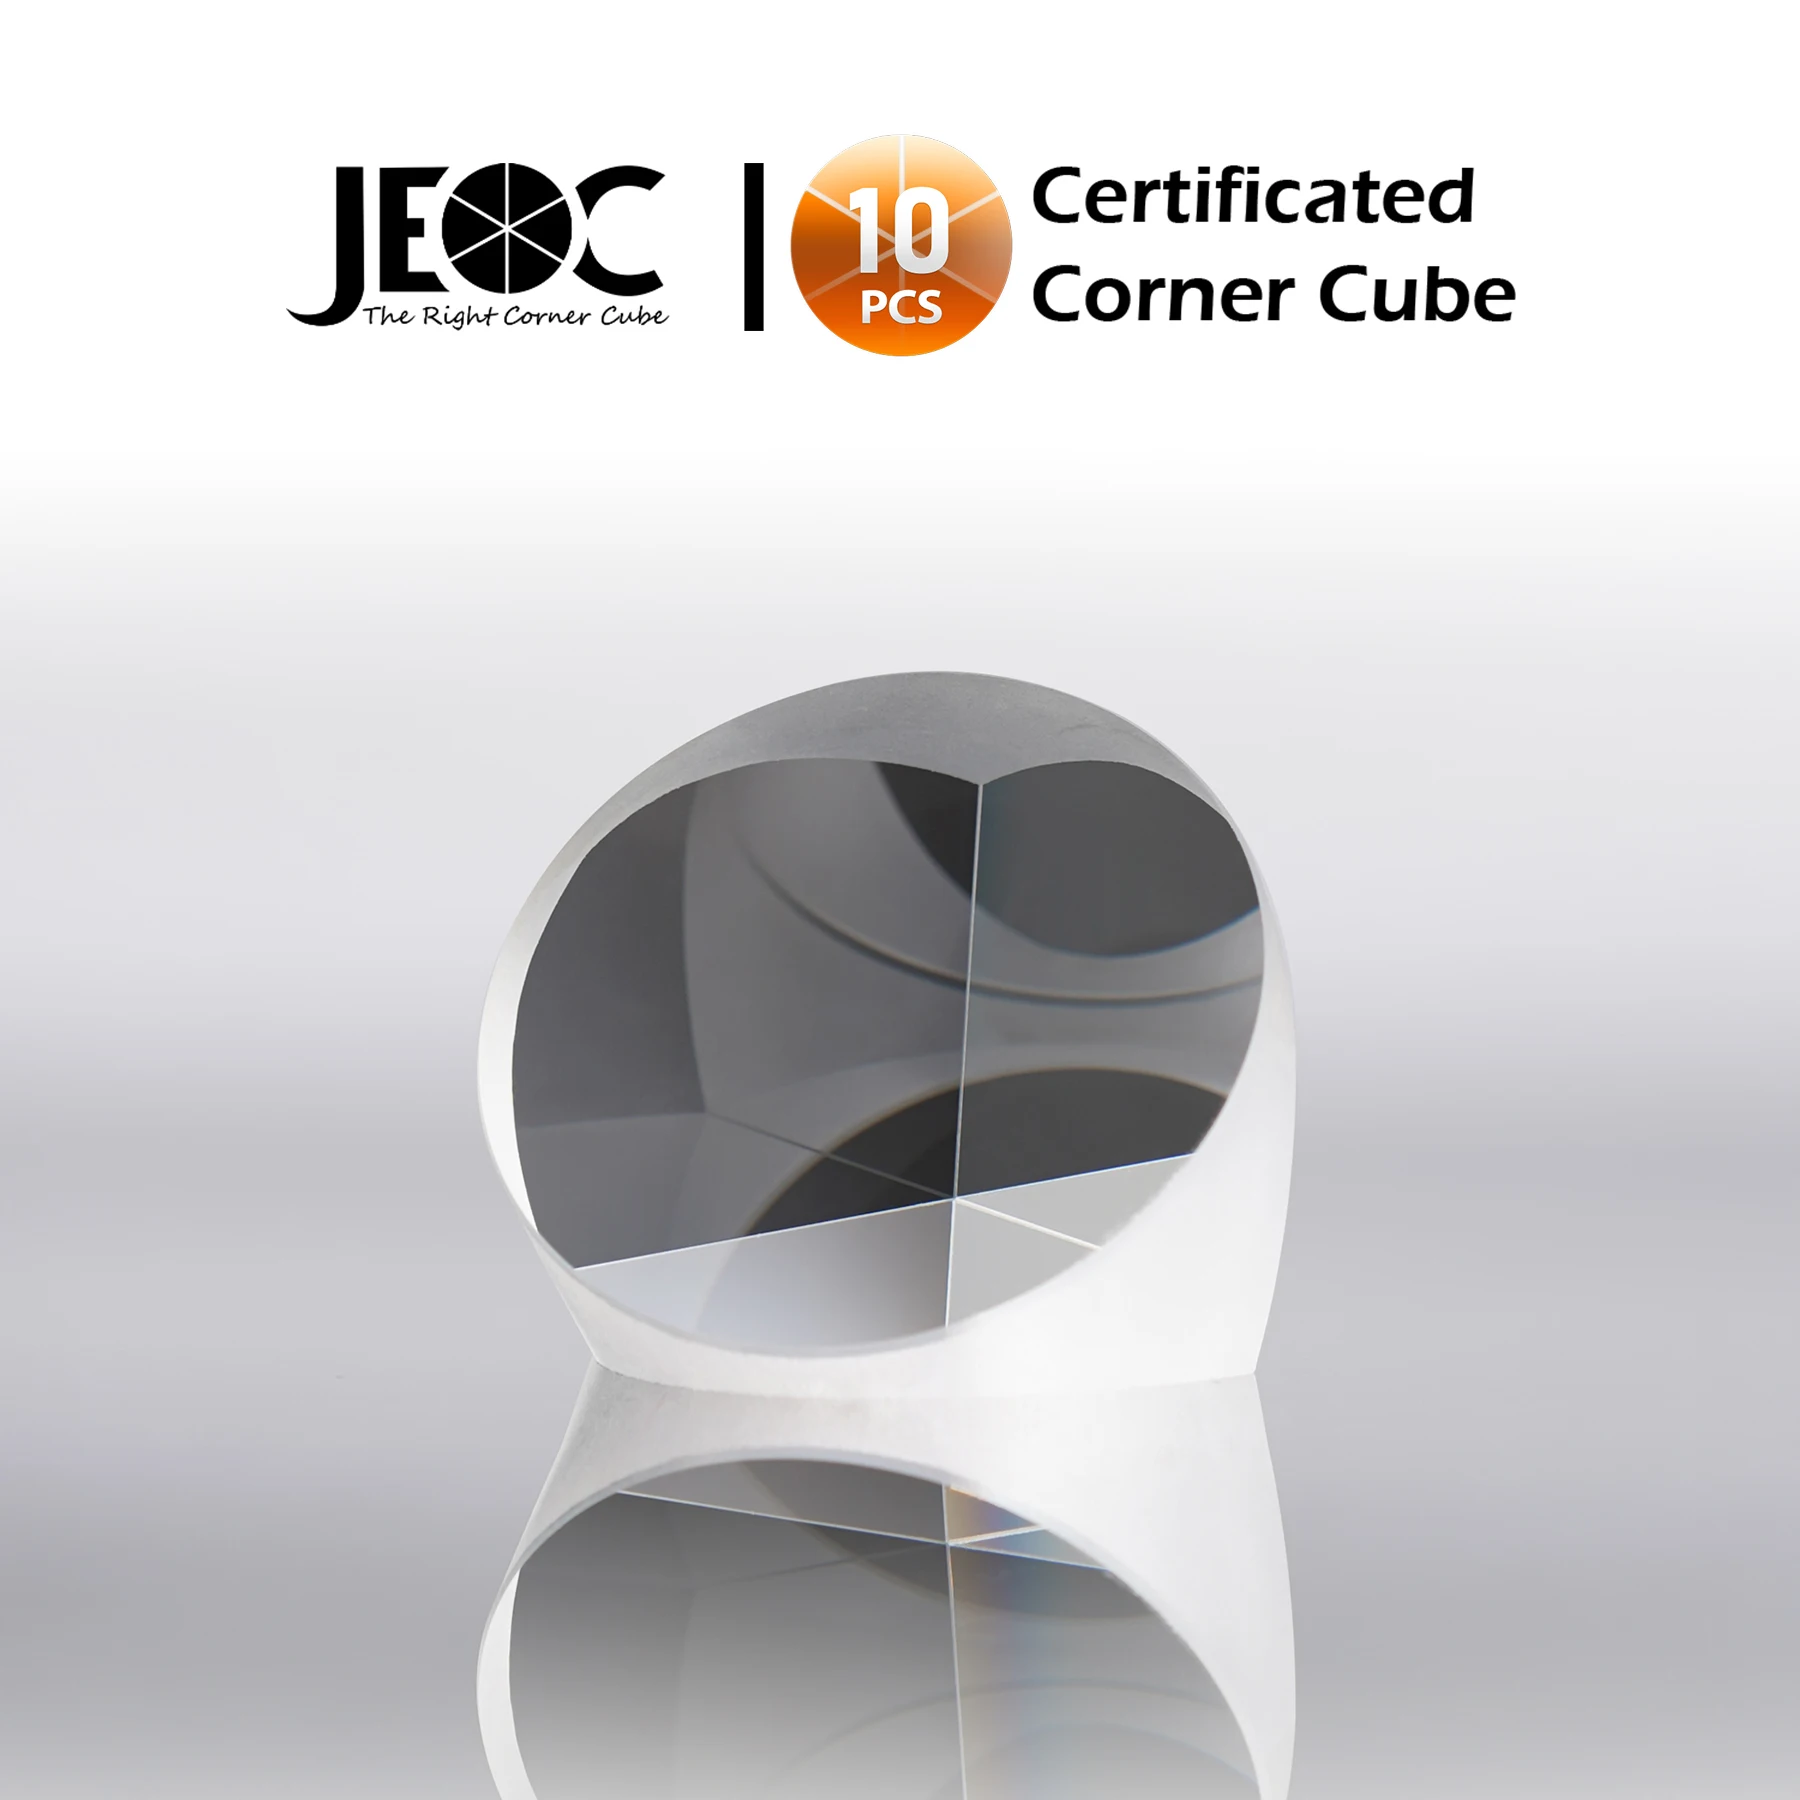 

10pcs JEOC Certificated Corner Cube, 42mm Diameter, 38mm Height reflective prism, Uncoated